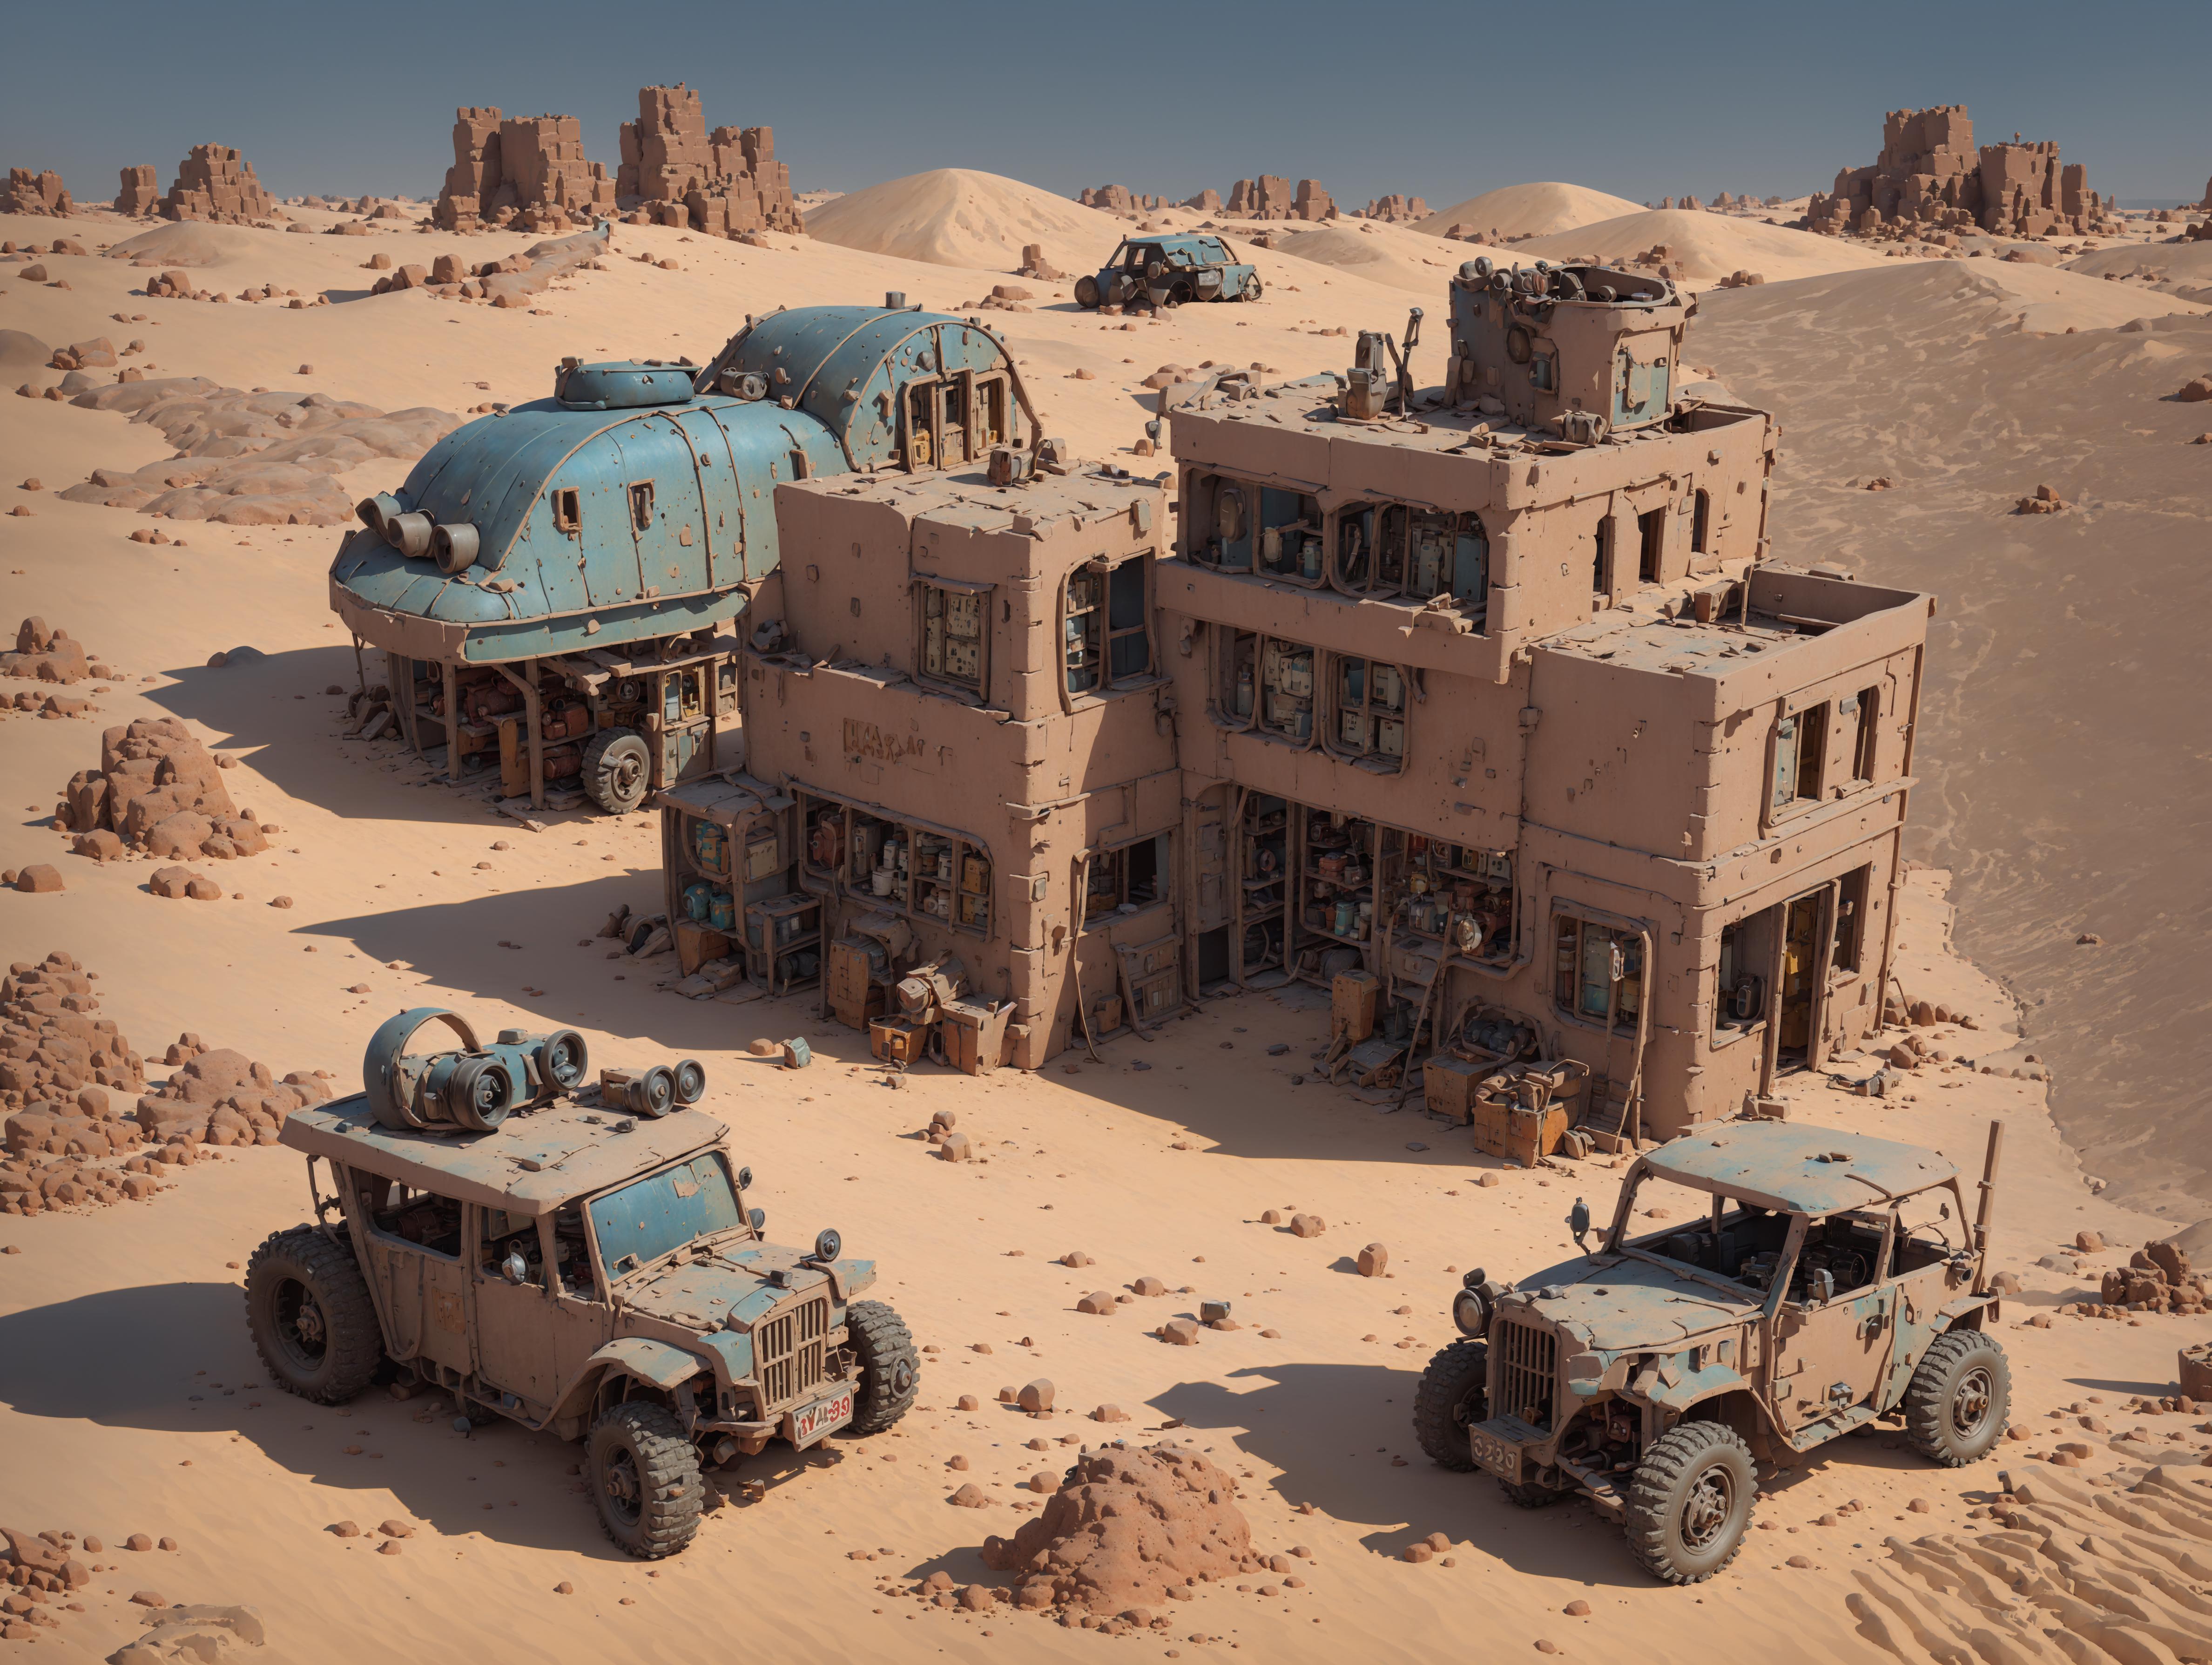 A Dilapidated Town in a Desert with Rusted Trucks and Buildings